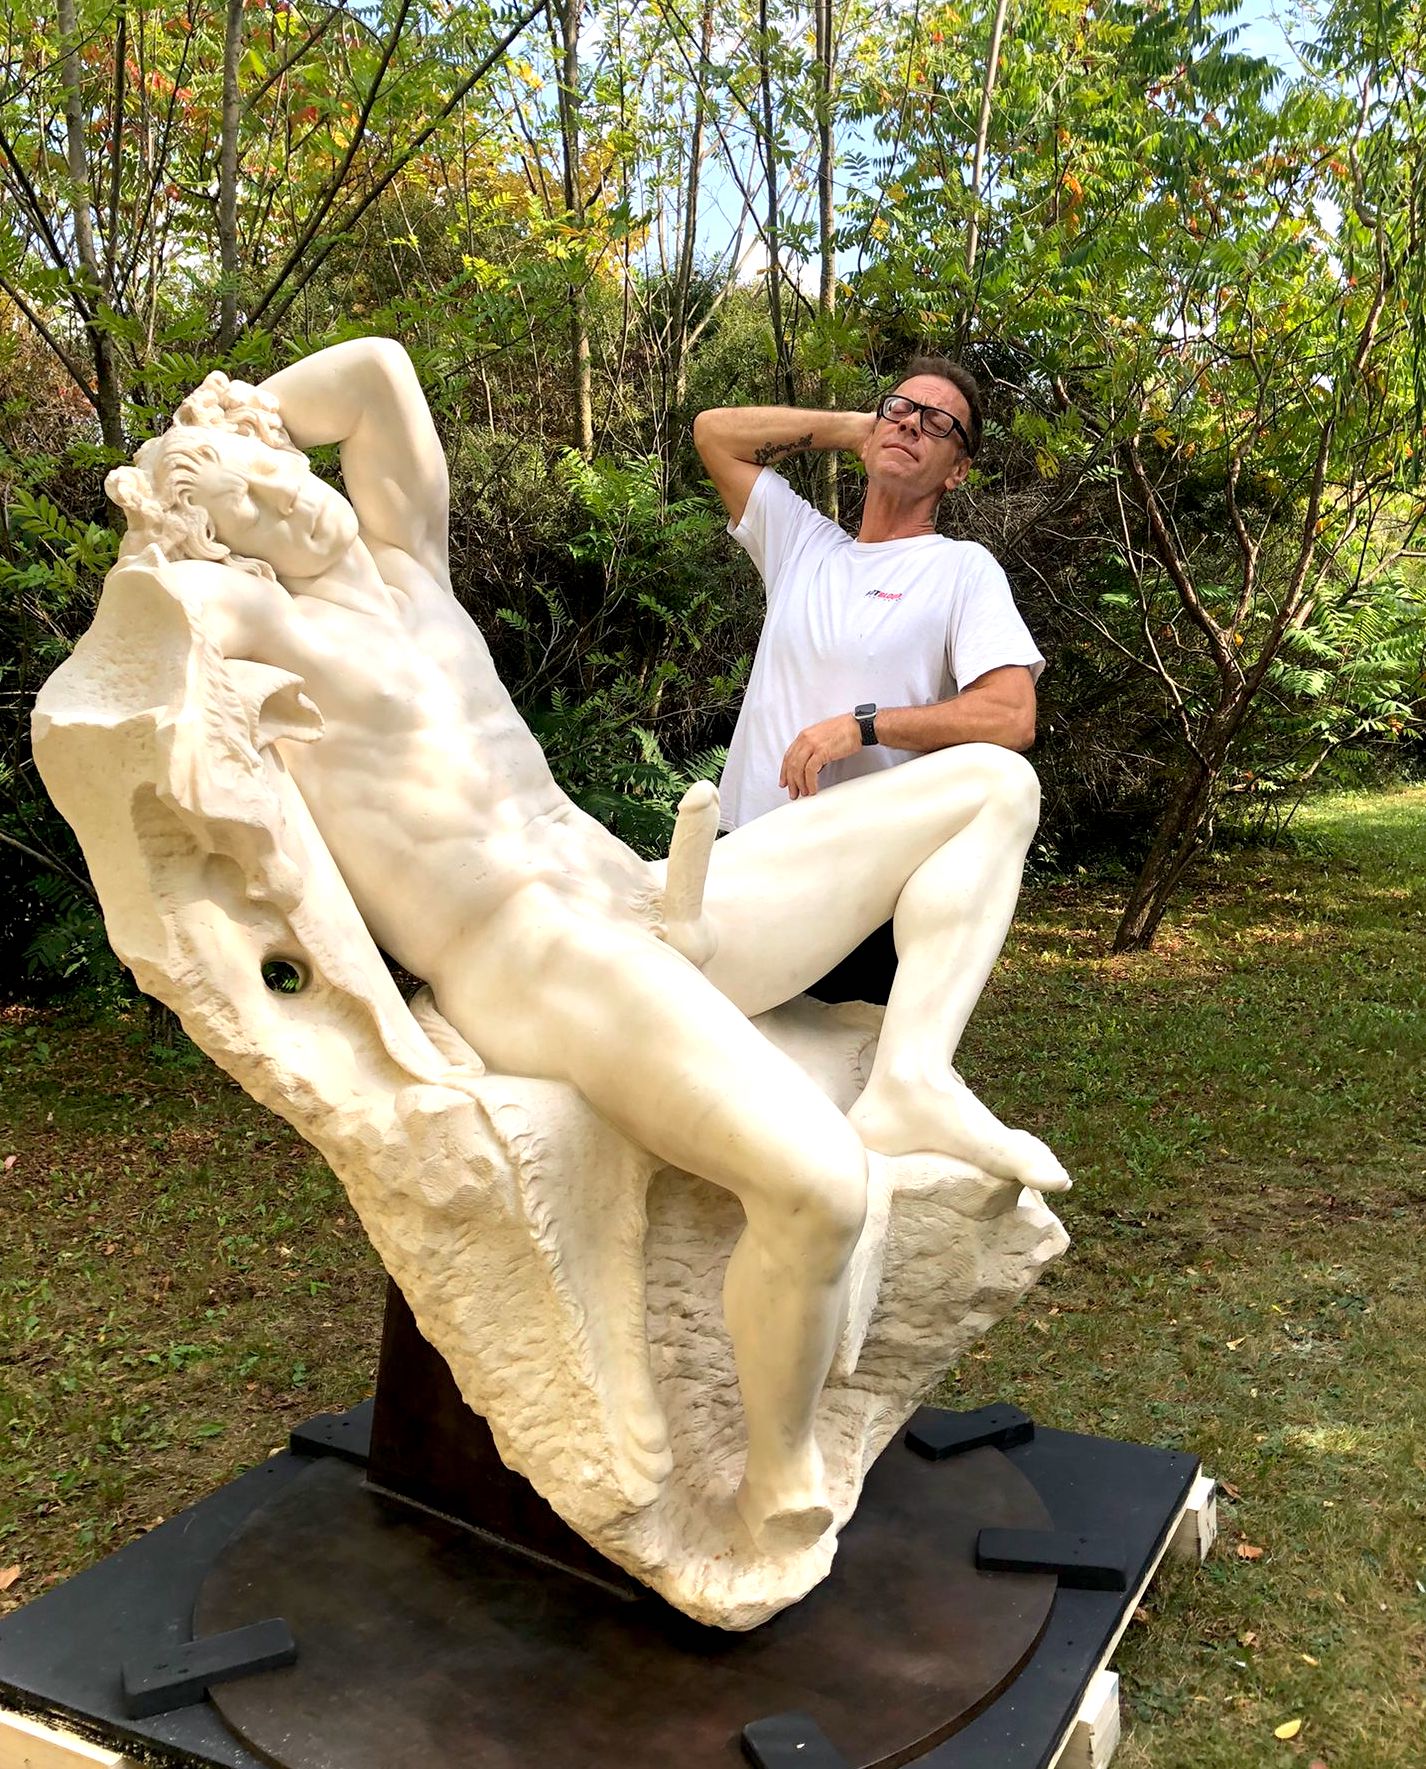 A Look at the Rocco Siffredi Sculpture, Which Will Star in his Next Project. photo pic photo